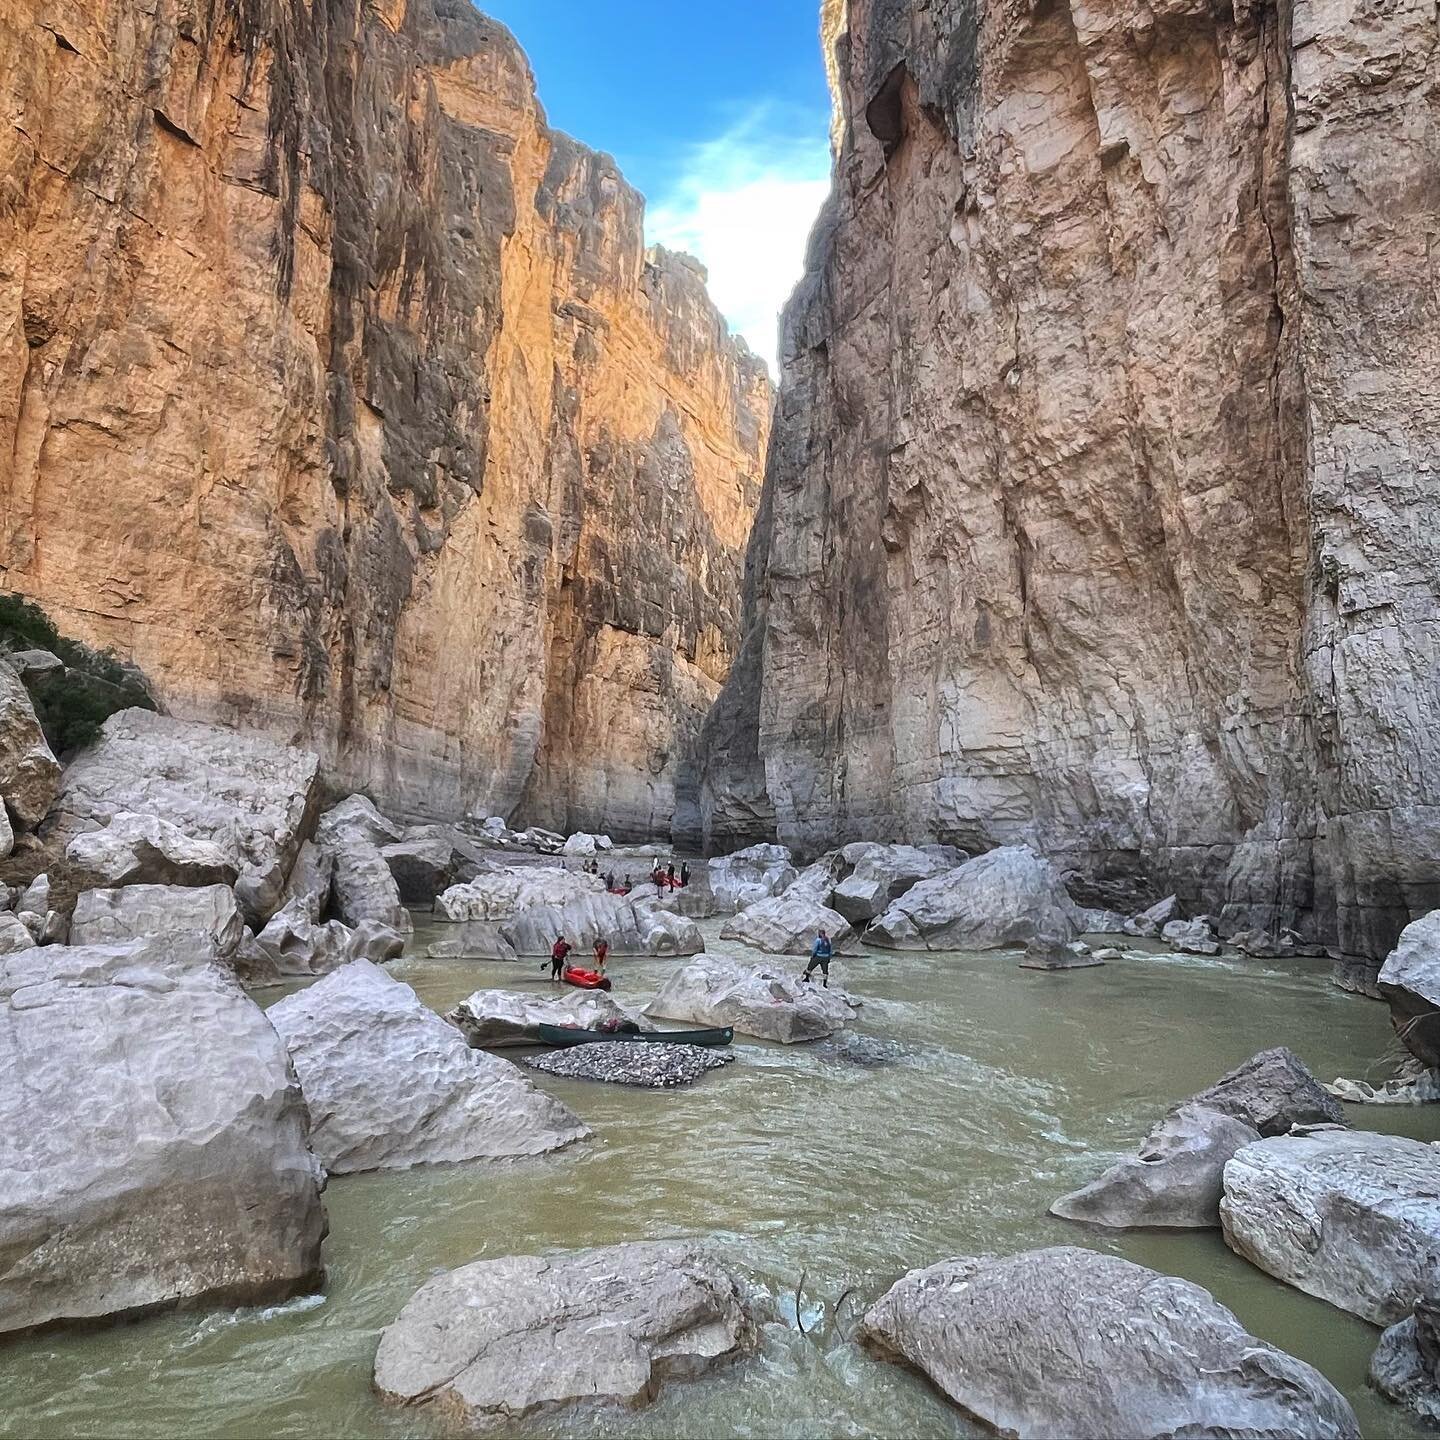 Photographed while river guiding for @angellexpeditions in @bigbendnps Santa Elena Canyon, Rio Grande, Big Bend National Park.

I was on standby river rescue at this vantage point on top of a large boulder half way through the &ldquo;Rock Slide&rdquo